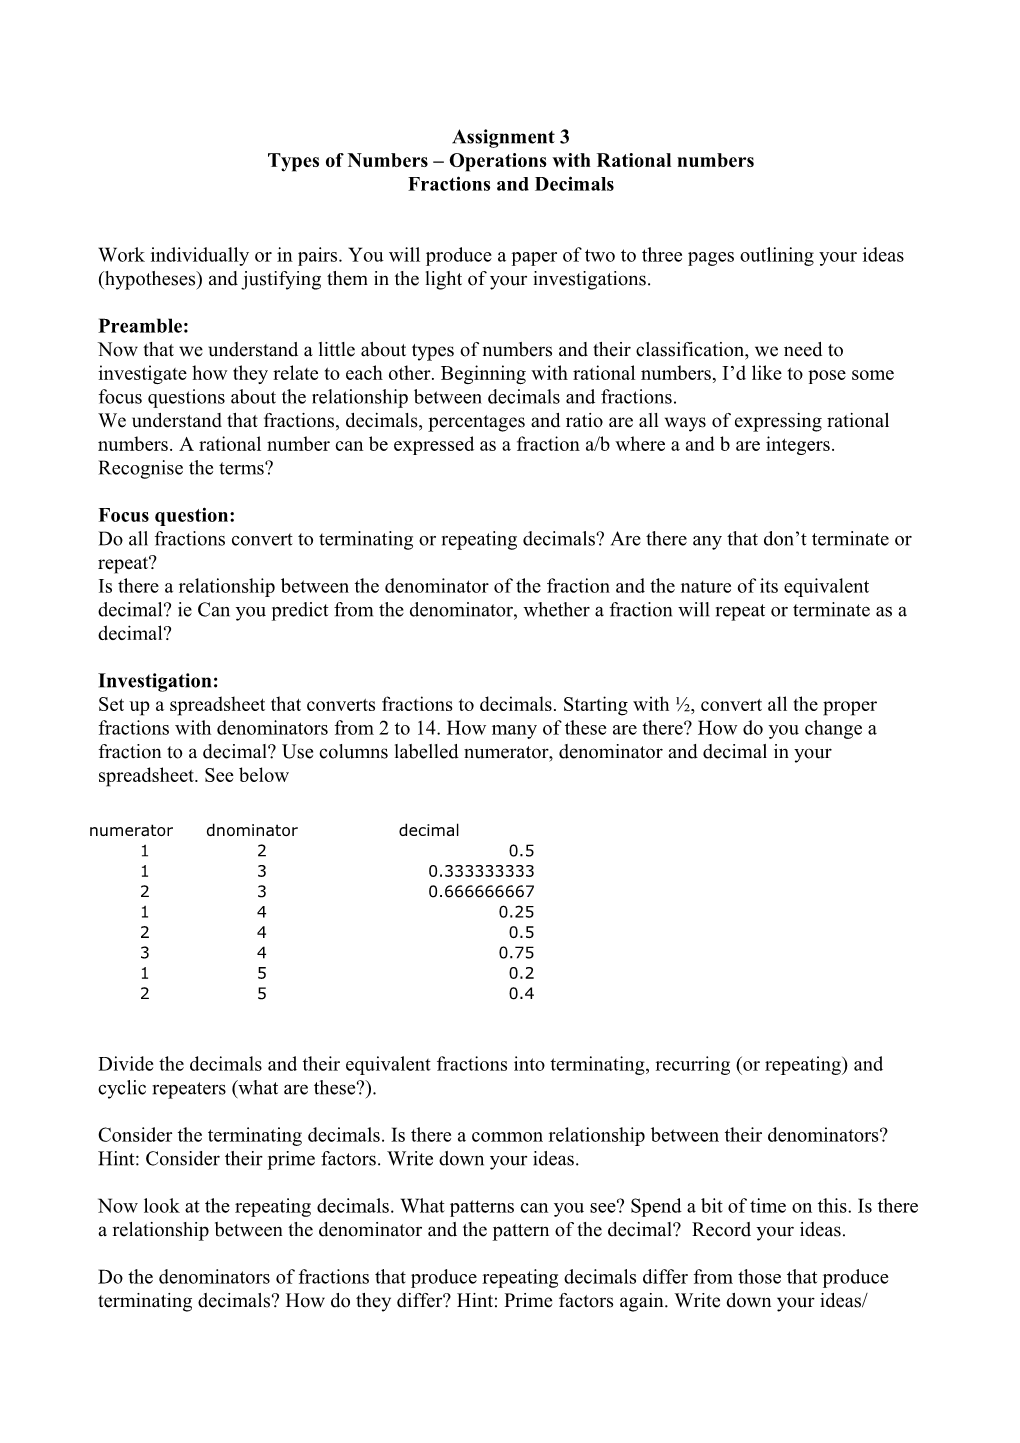 Types of Numbers Operations with Rational Numbers